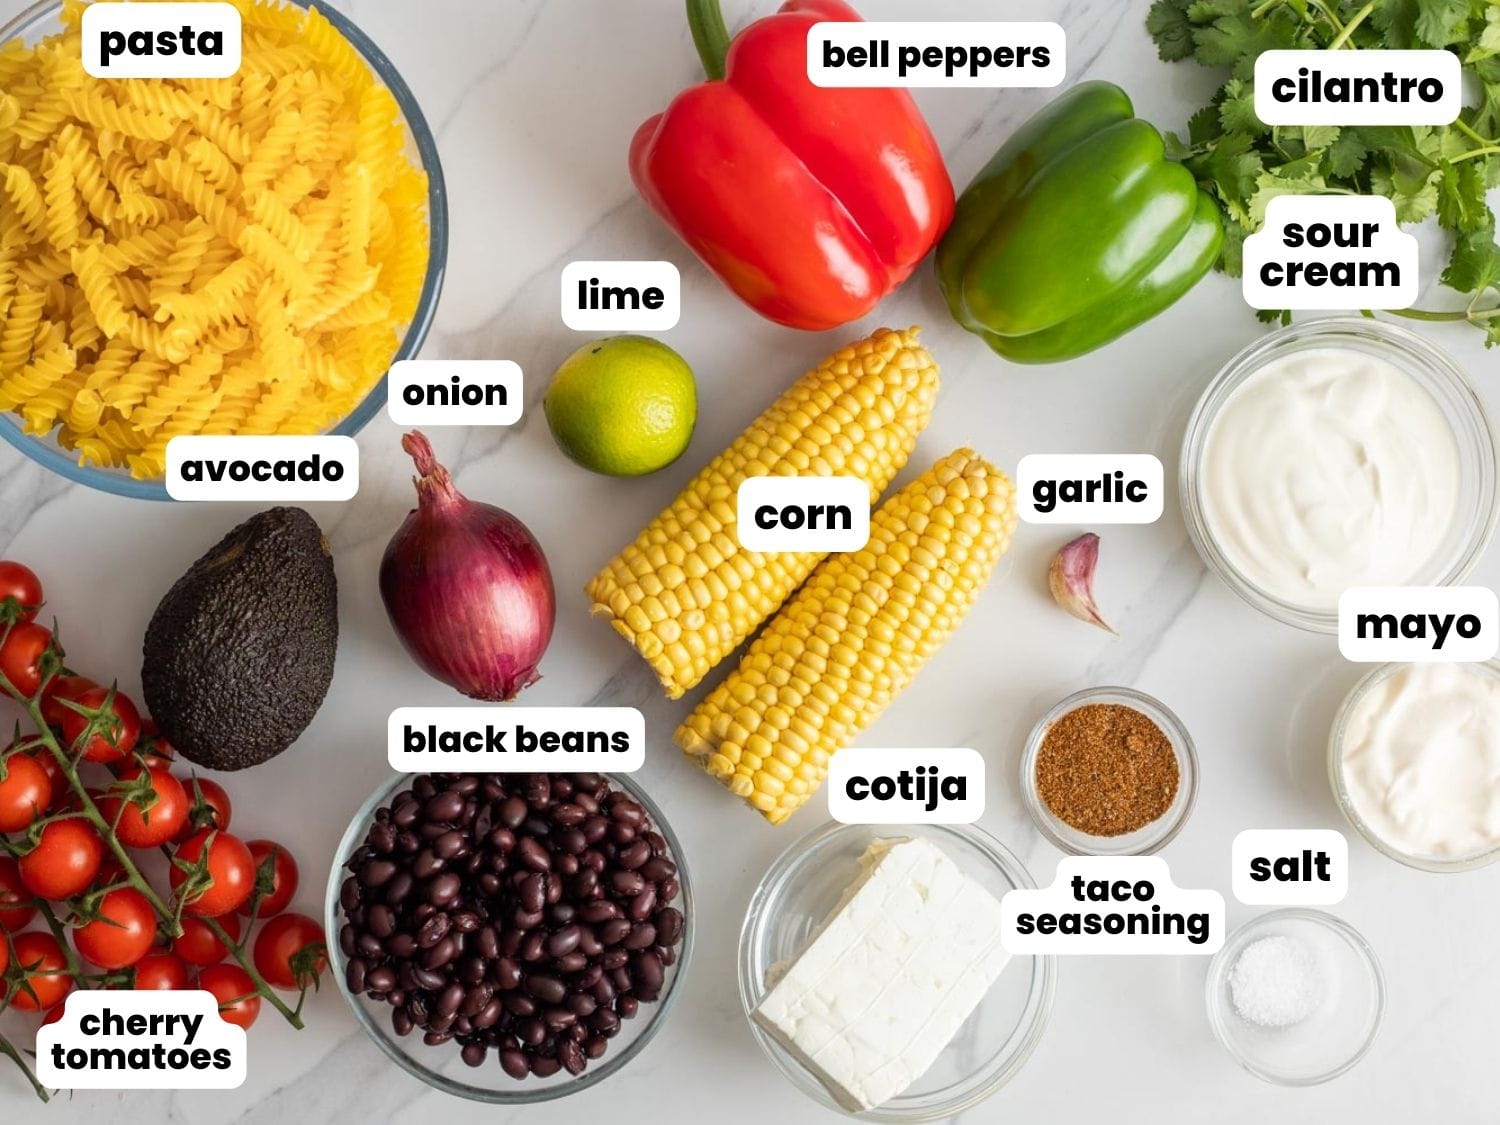 The ingredients needed to make mexican pasta salad including tomatoes, peppers, corn, and beans, are arranged on a marble counter top, viewed from above.